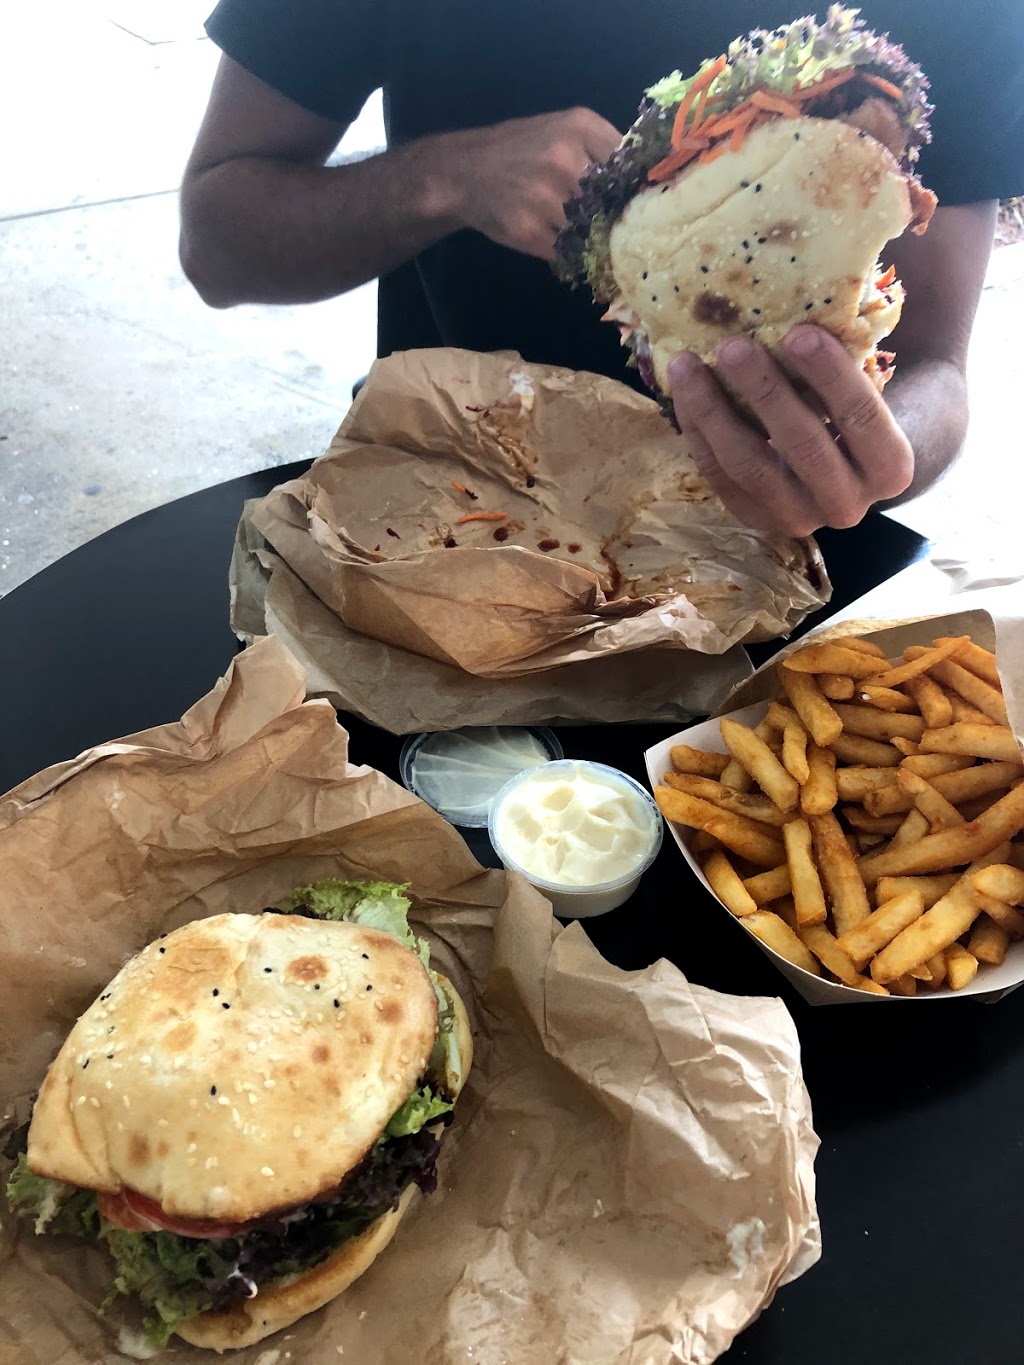 Sea Salt Fish & Chips | meal takeaway | 29 First Ave, Sawtell NSW 2452, Australia | 1300737258 OR +61 1300 737 258